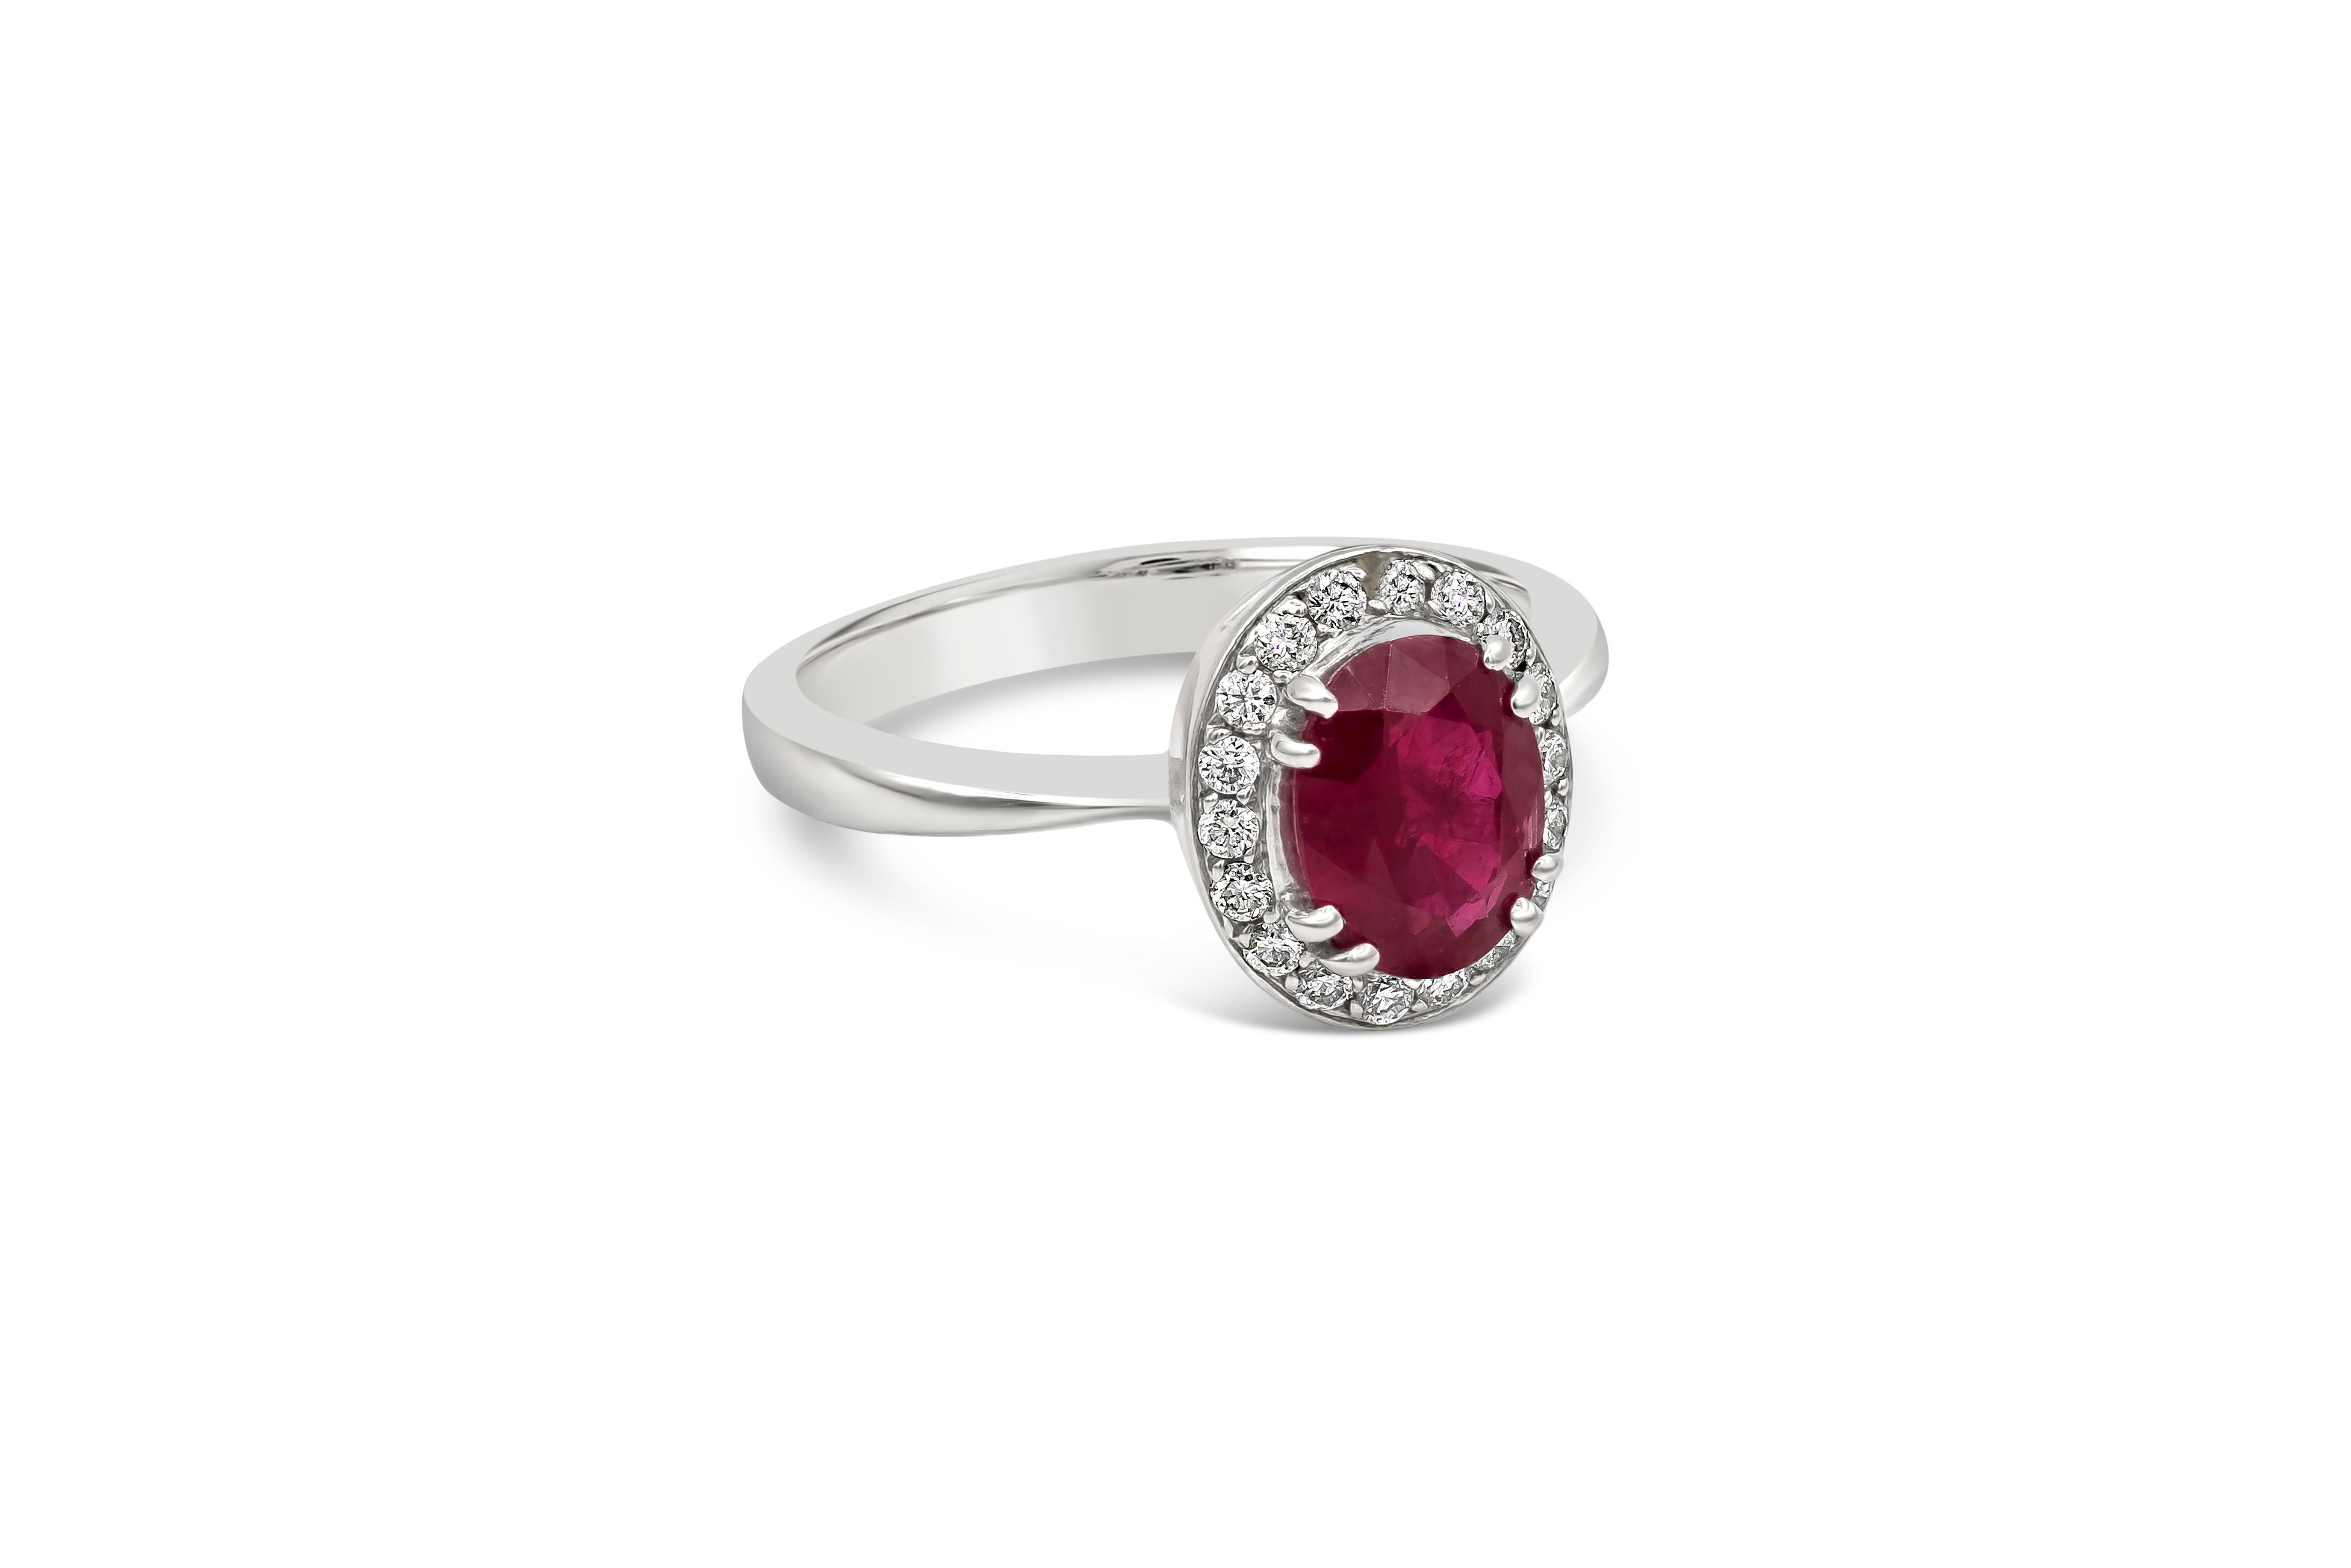 Showcasing a vibrant oval cut ruby weighing 1.36 carat total, surrounded by a row of brilliant round diamonds in a halo design weighing 0.19 carats total. Made with 14K White Gold, Size 6 US

Roman Malakov is a custom house, specializing in creating